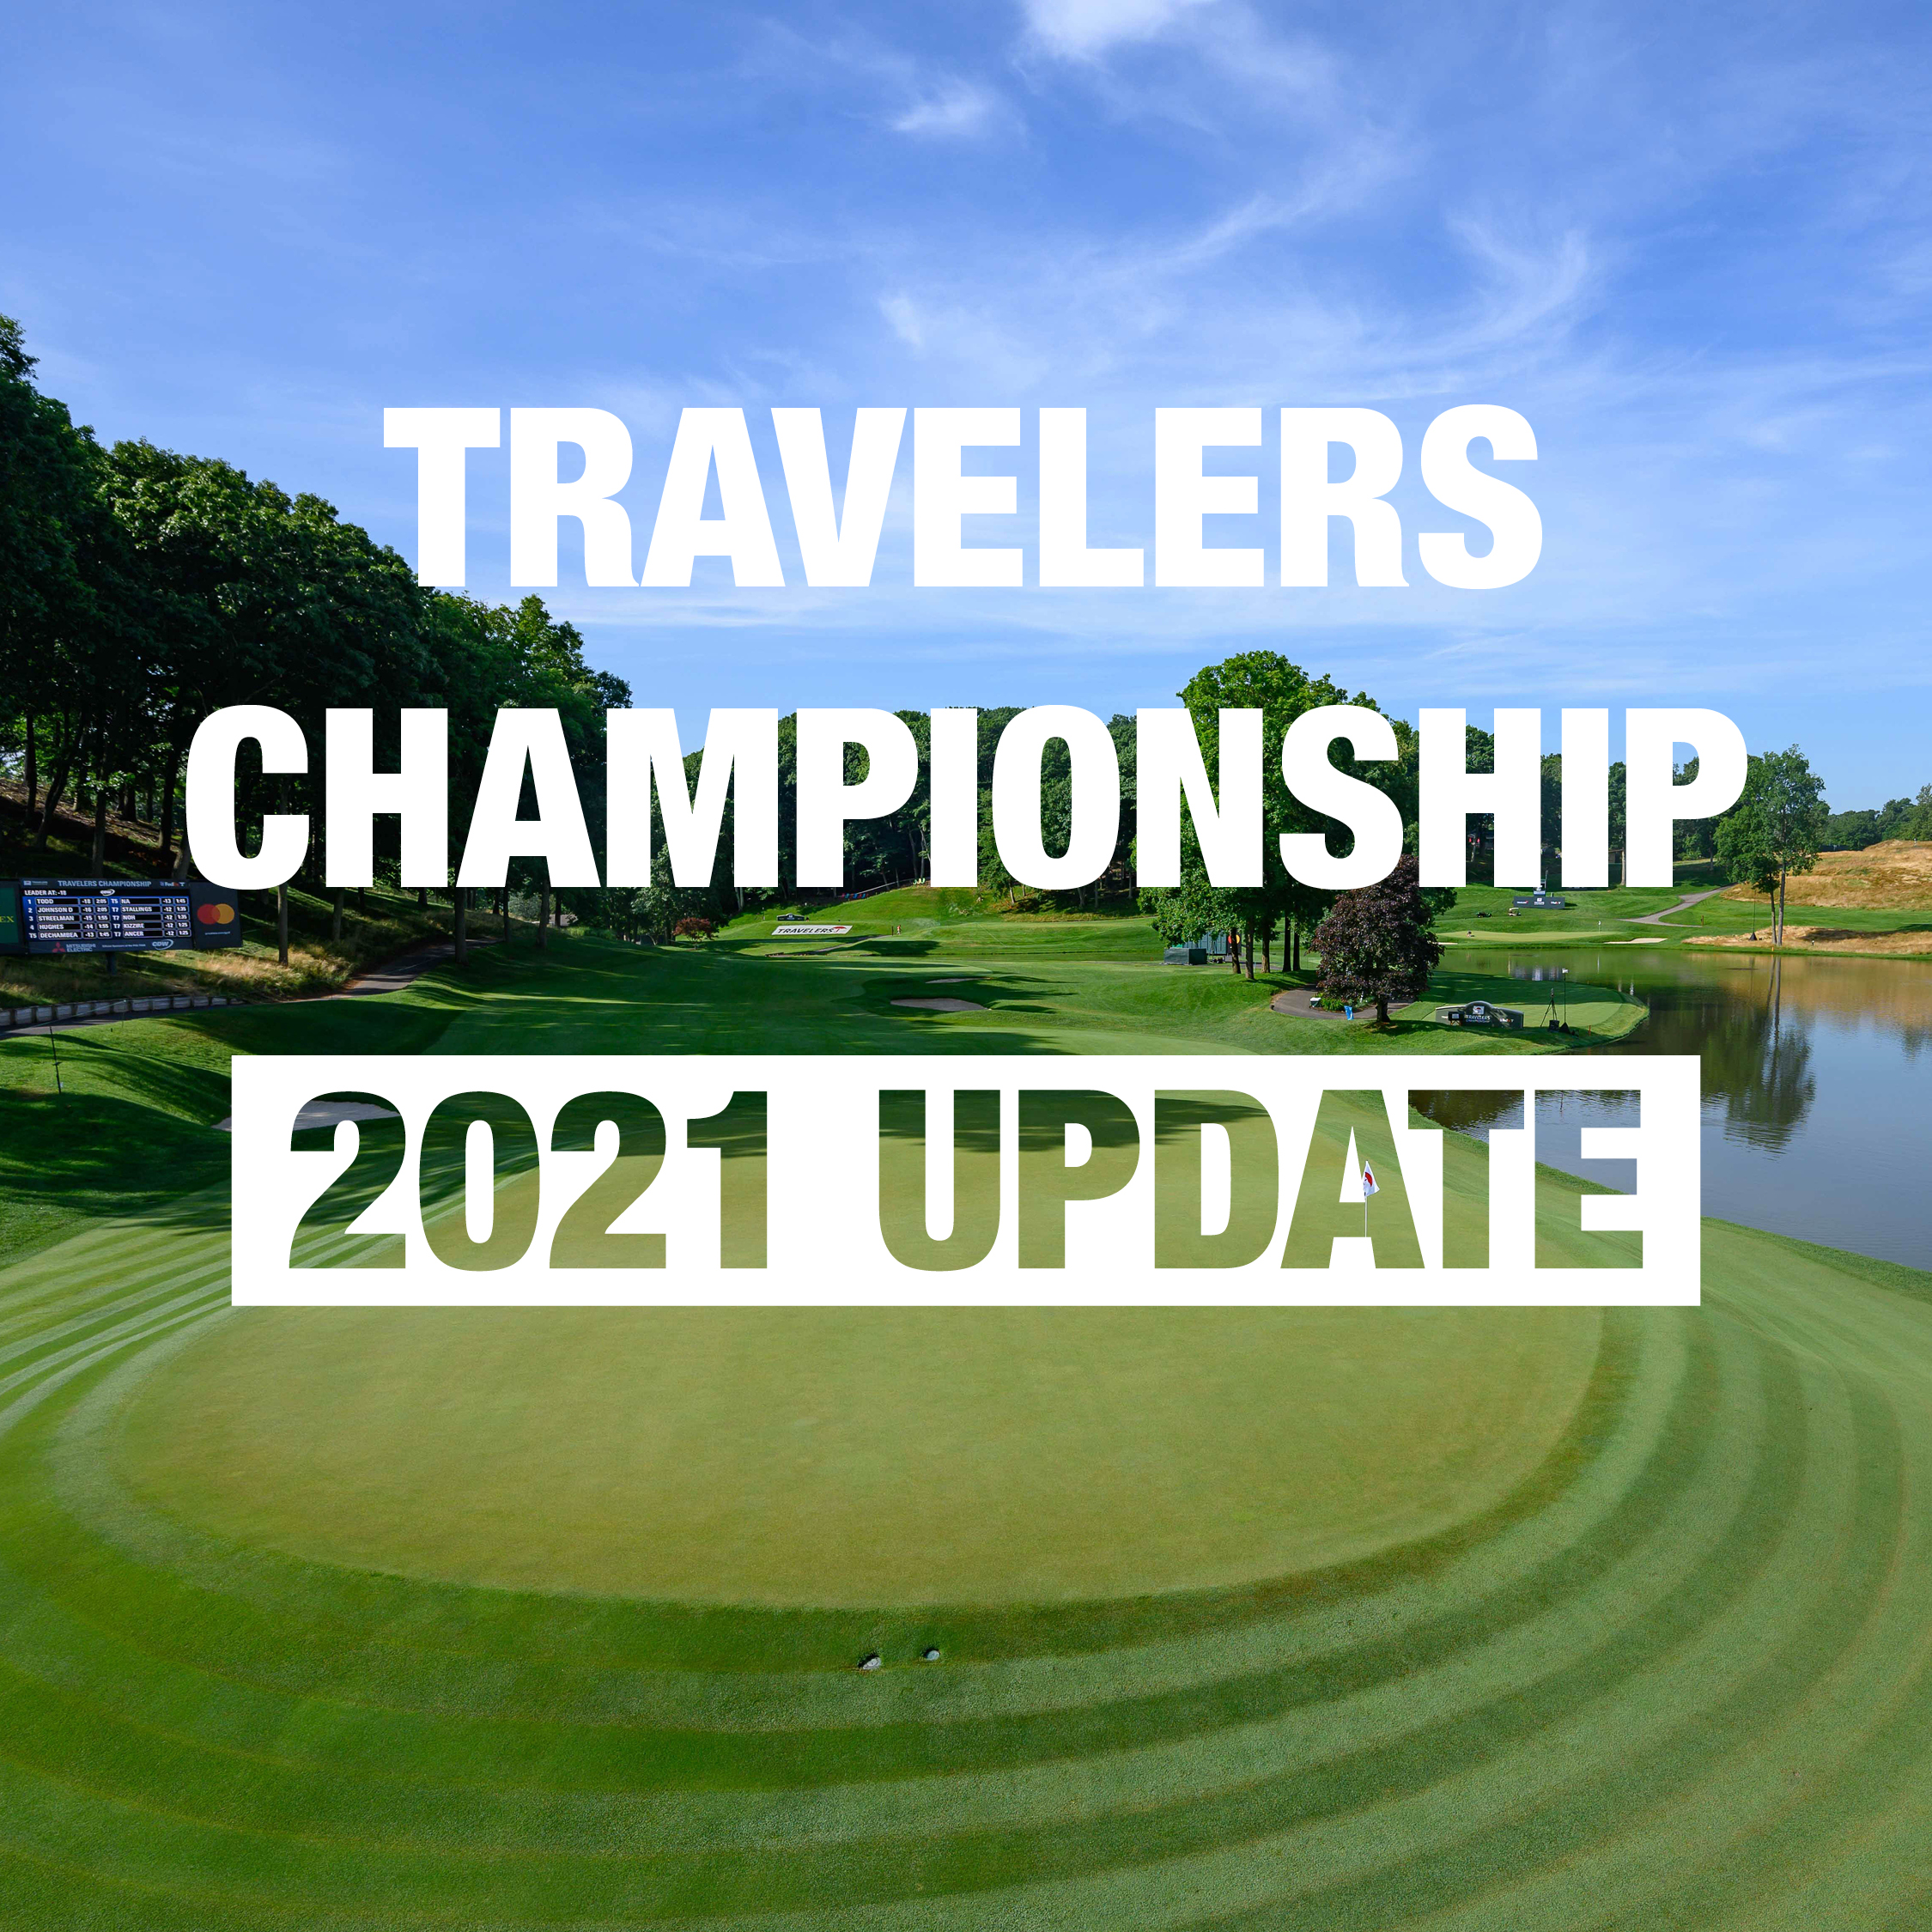 TRAVELERS CHAMPIONSHIP ANNOUNCES DETAILS FOR TICKETS AND ON-SITE HEALTH AND SAFETY GUIDELINES – Travelers Championship